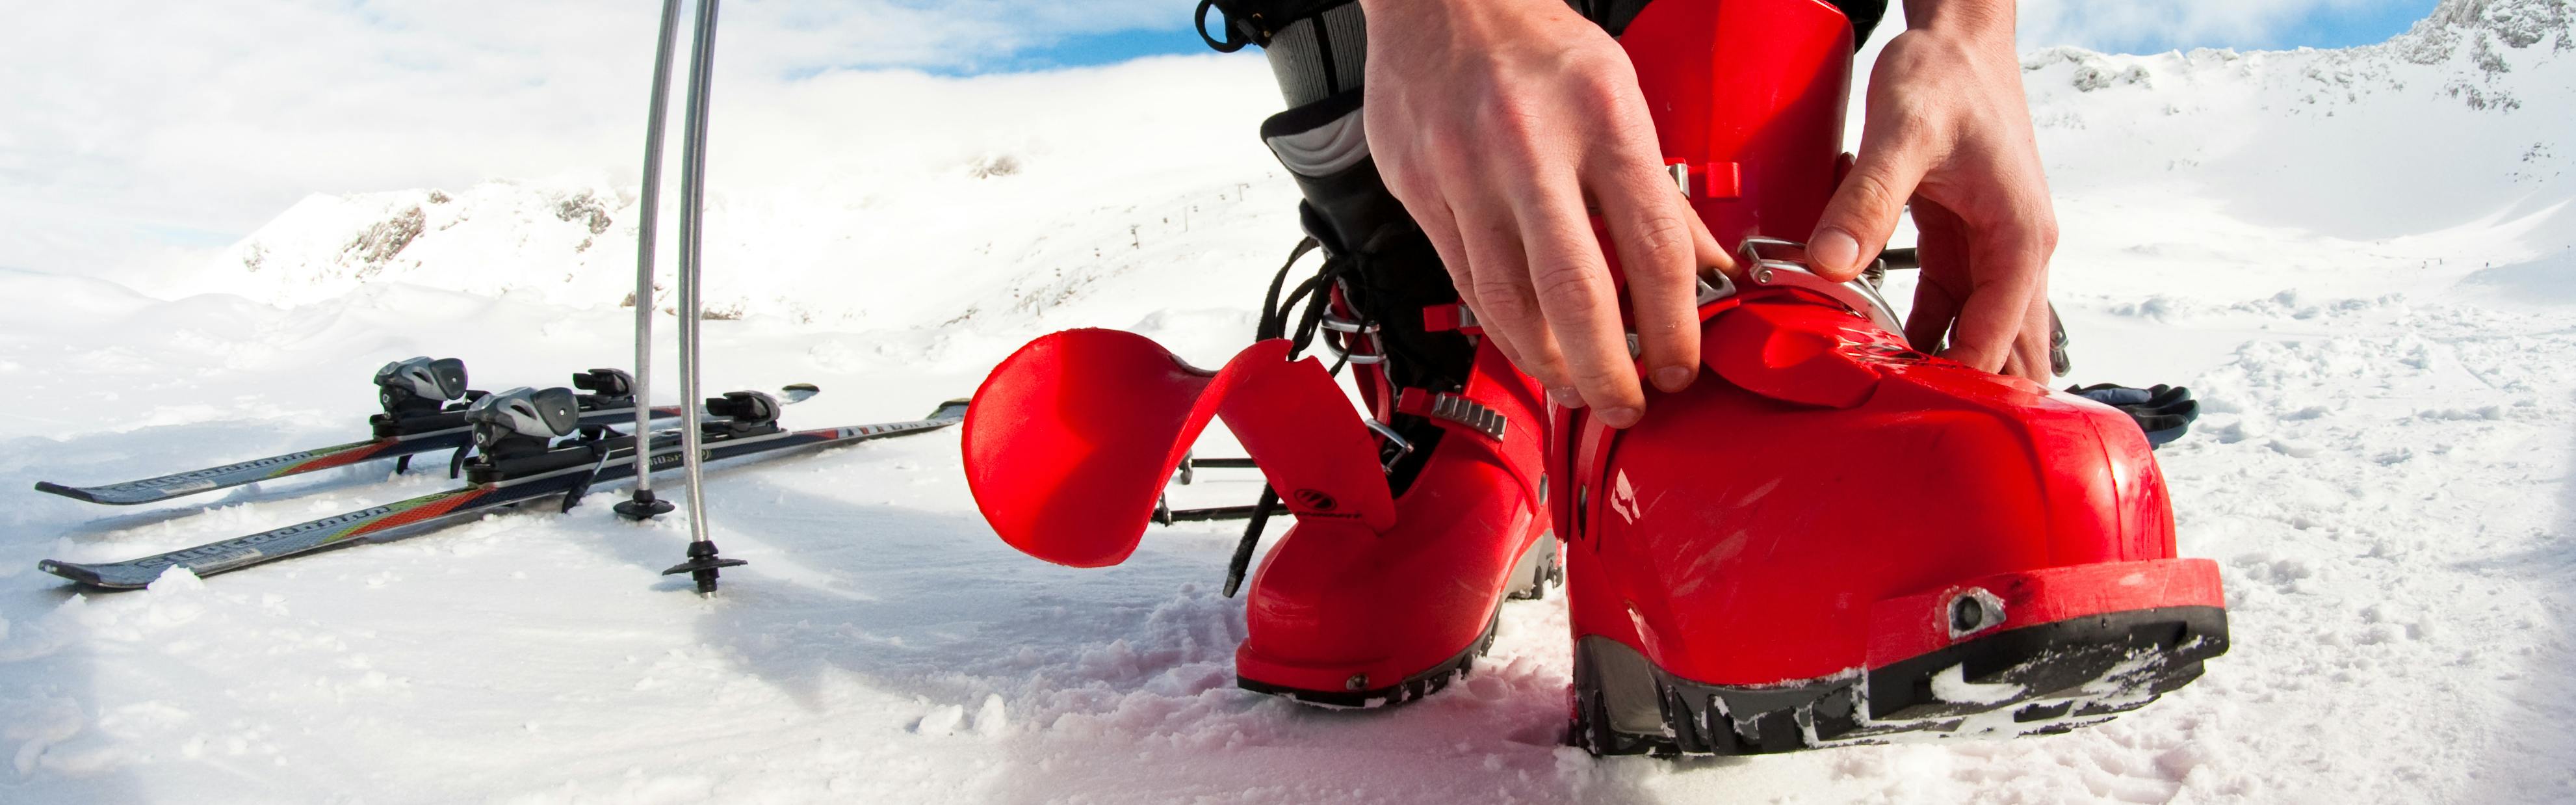 How to care for your skis: the complete guide by